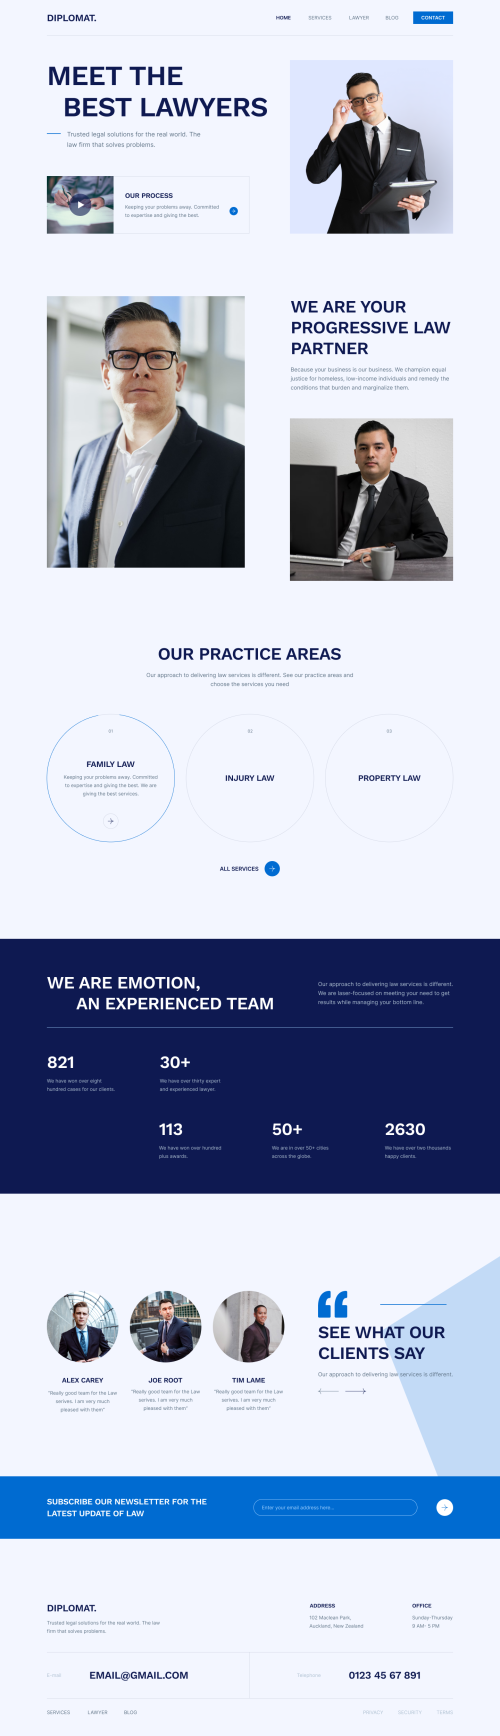 UIHut - Diplomat Law Firm Landing Page - 18204